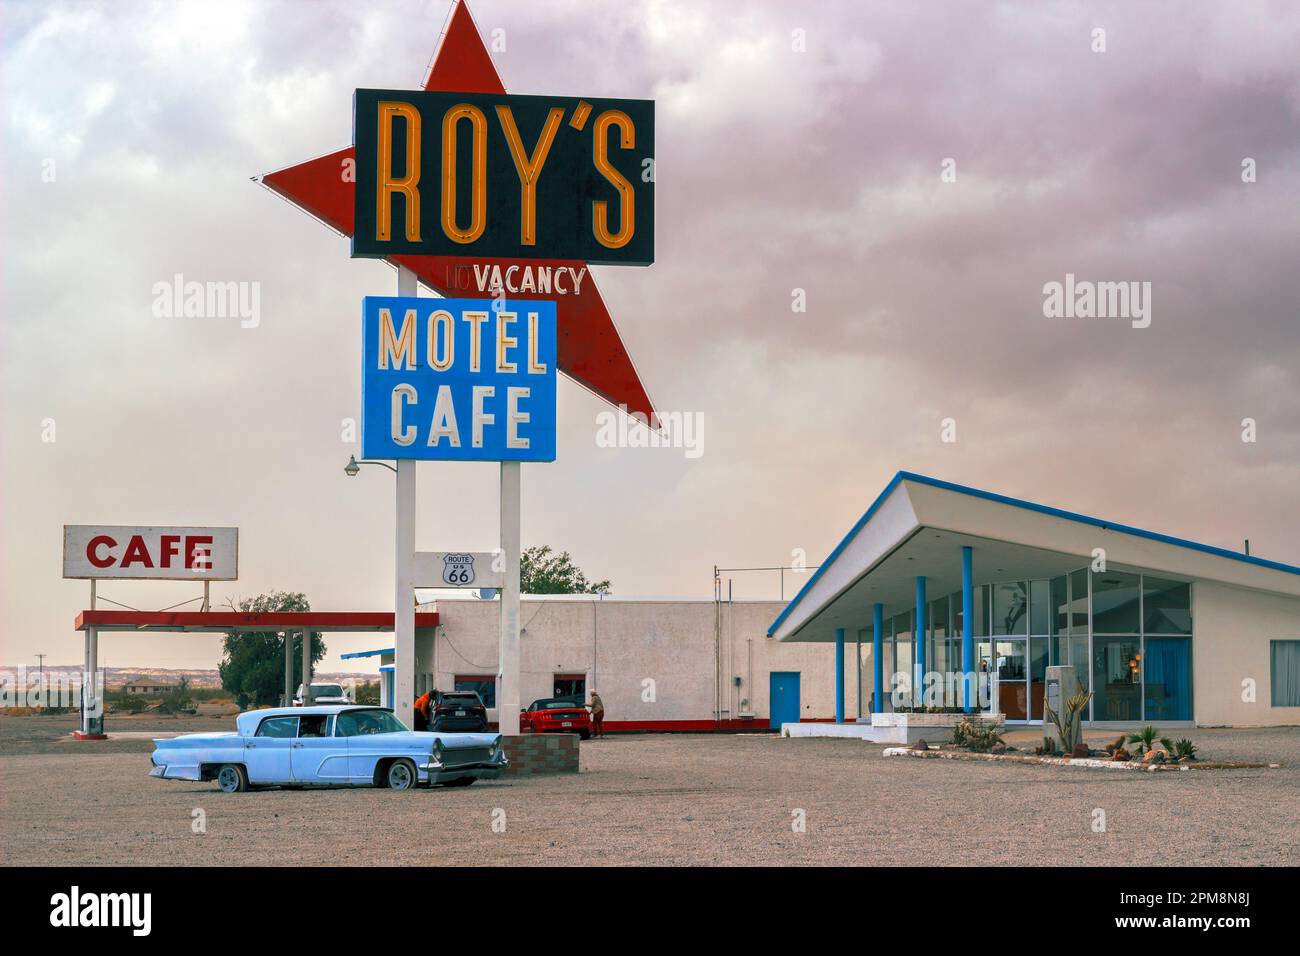 The photo shows a sign and a vintage car in front of Roy's Motel, a famous abandoned motel located in the ghost town of Amboy, California. Stock Photo